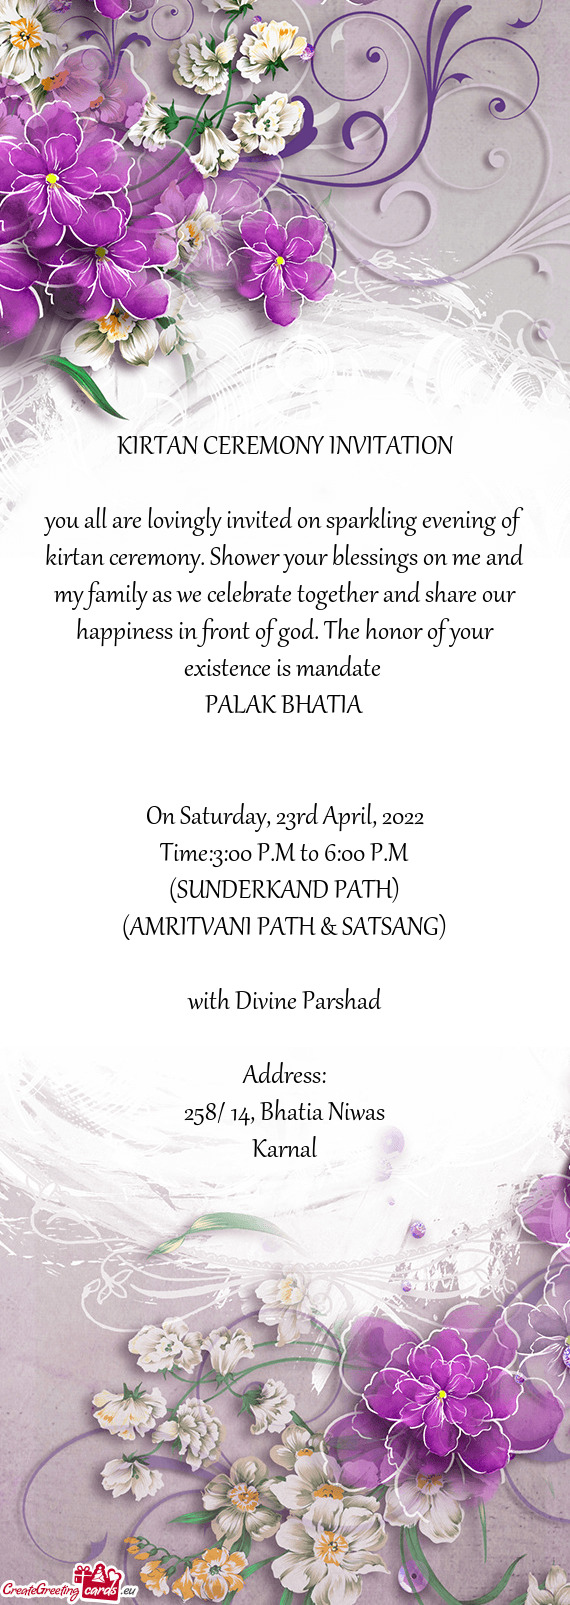 You all are lovingly invited on sparkling evening of kirtan ceremony. Shower your blessings on me an